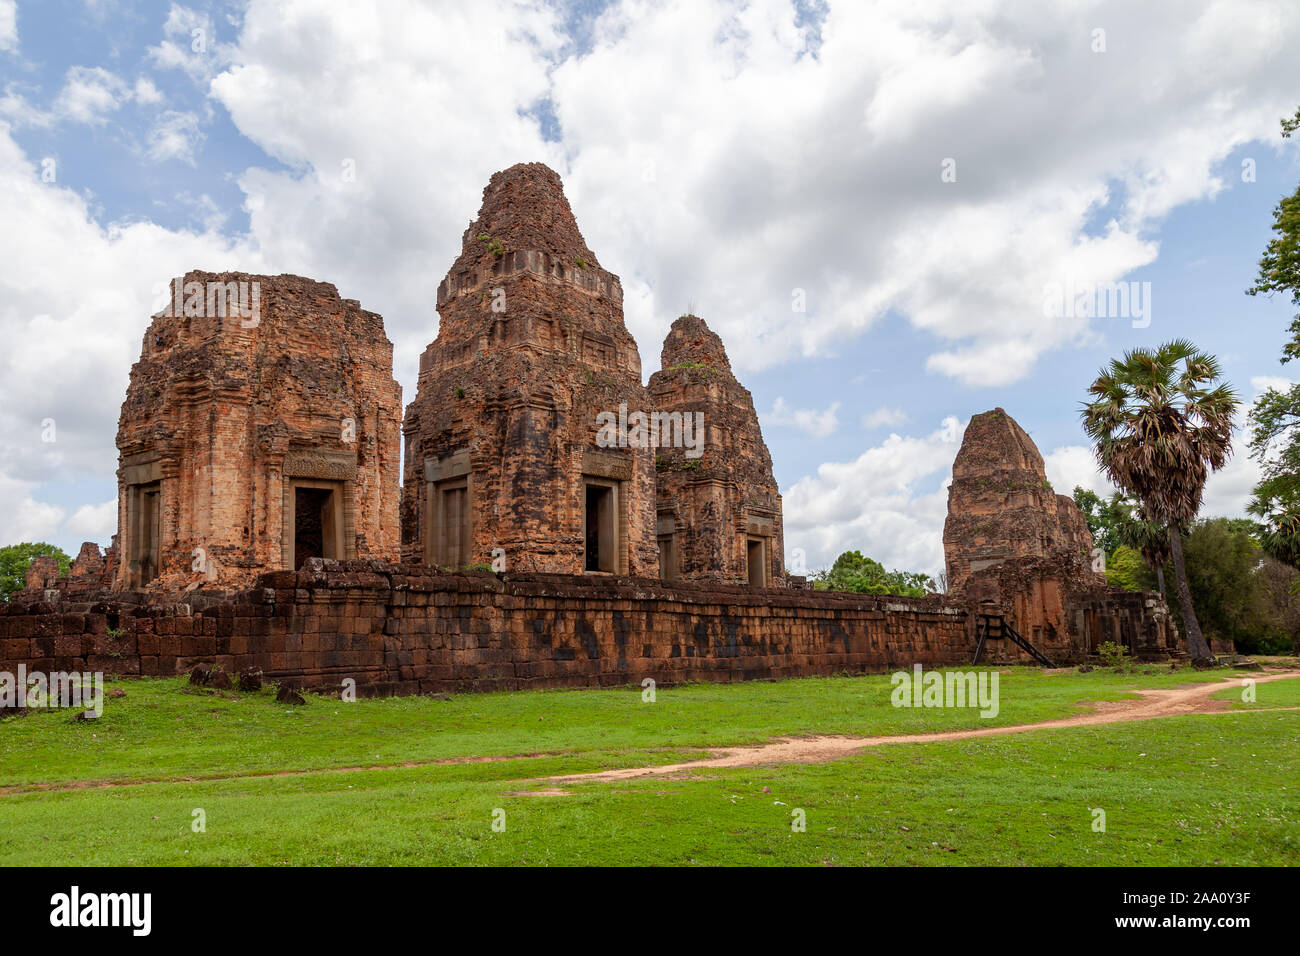 East Baray temple in rainy season. This is one of the bigger temples with nice elephant statues in Siem Reap, Cambodia. Rainy season makes for nice co Stock Photo